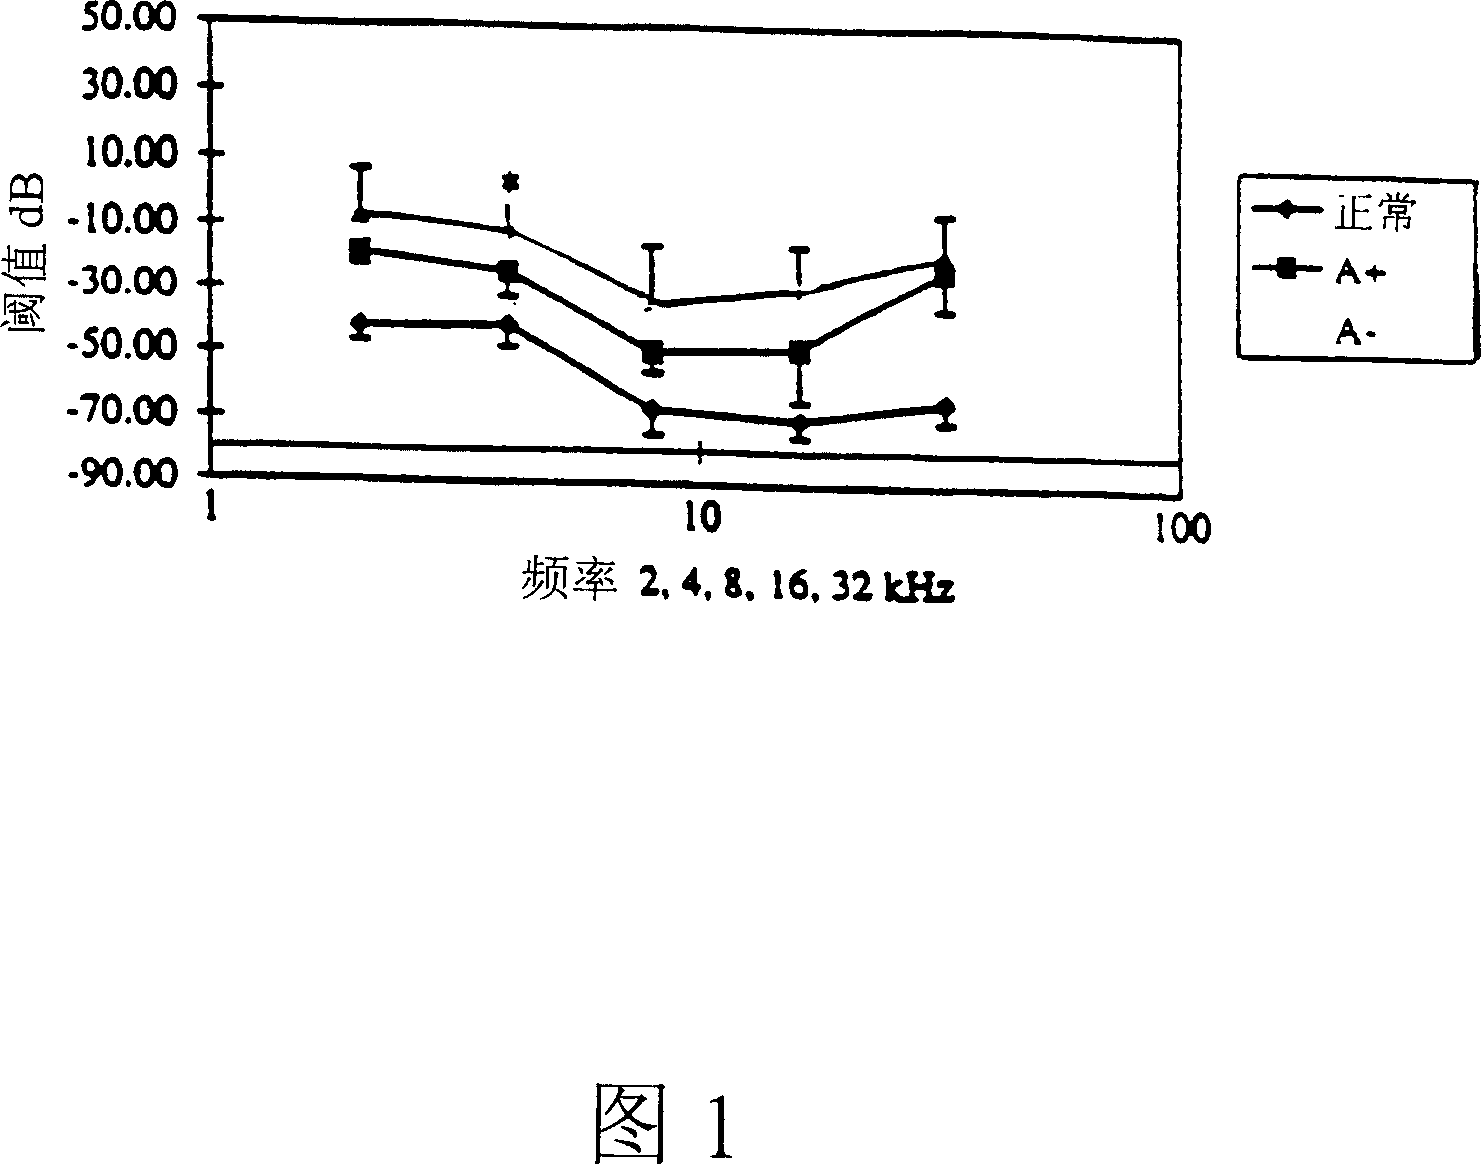 Method for preventing/treating damage to sensory hair cells and cochlear neurons